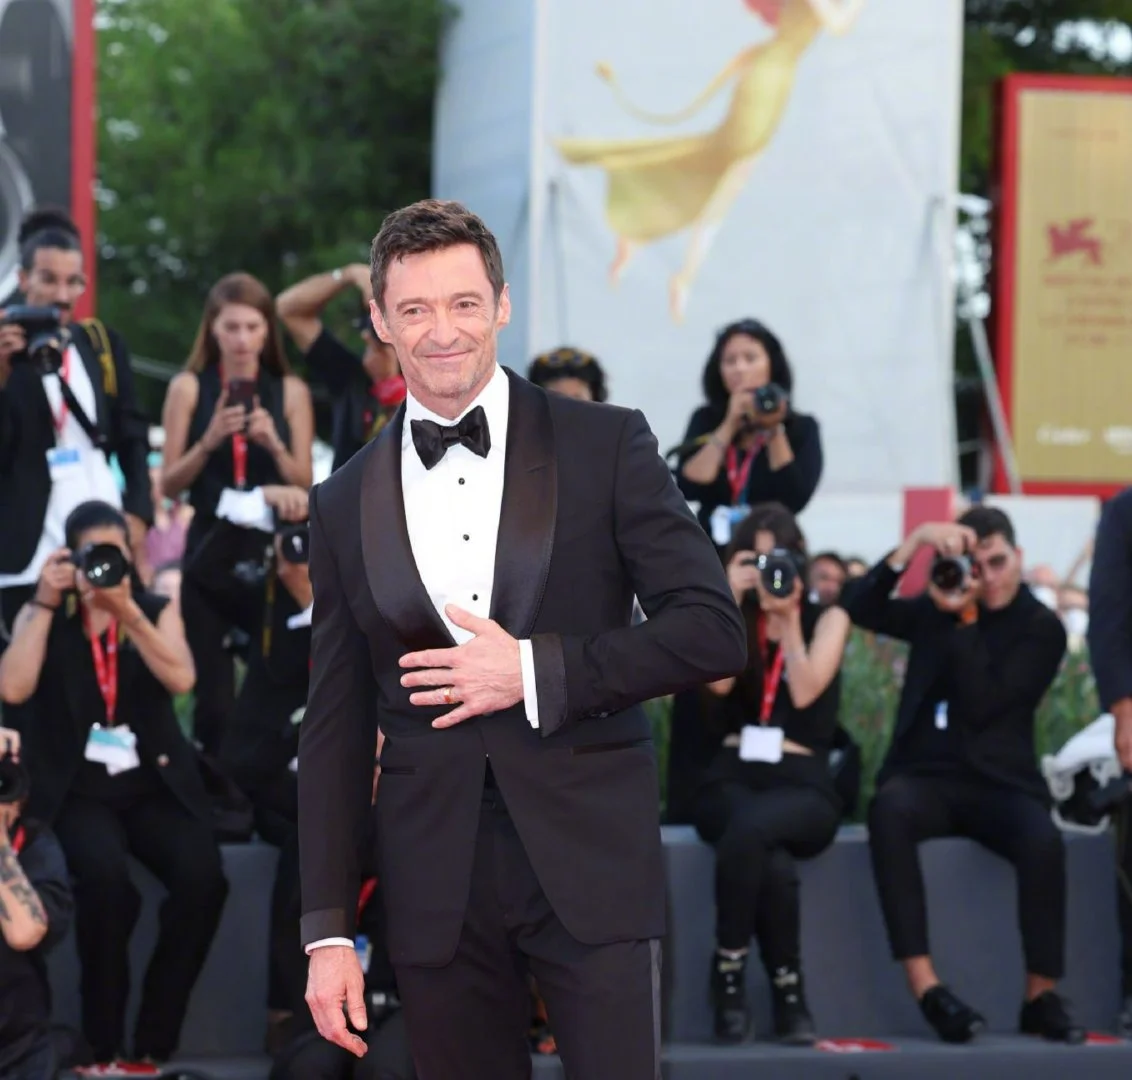 "The Son‎" premiered at the 79th Venice International Film Festival, Hugh Jackman kisses his wife on the red carpet | FMV6